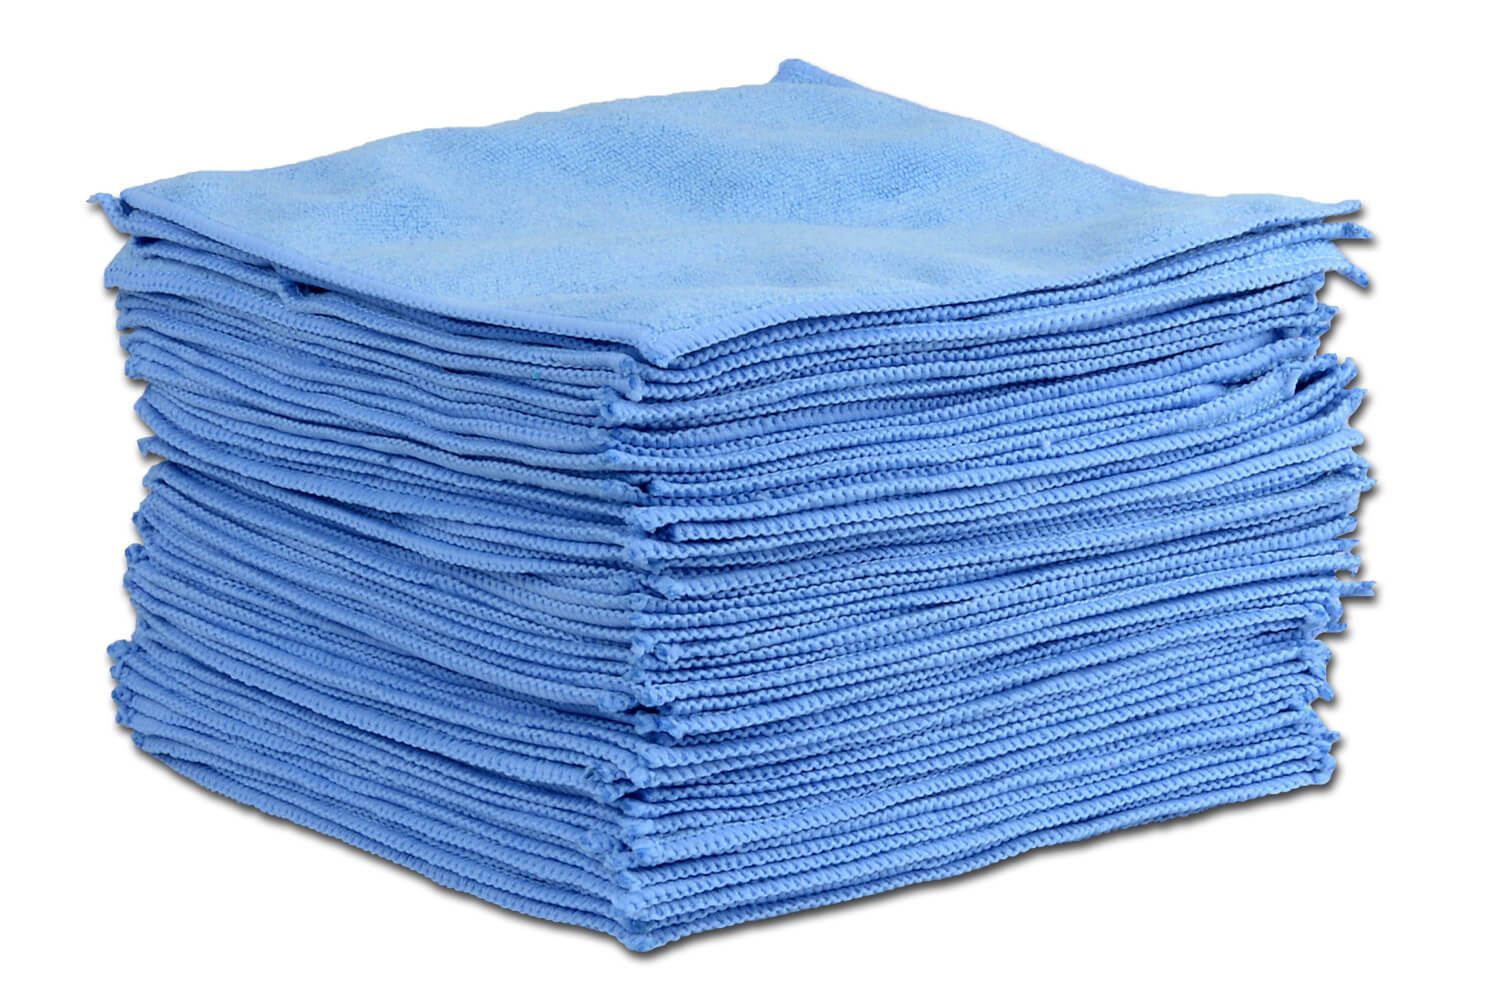 All Rags - Affordable Wiping Rags, Wholesale Bulk Rags